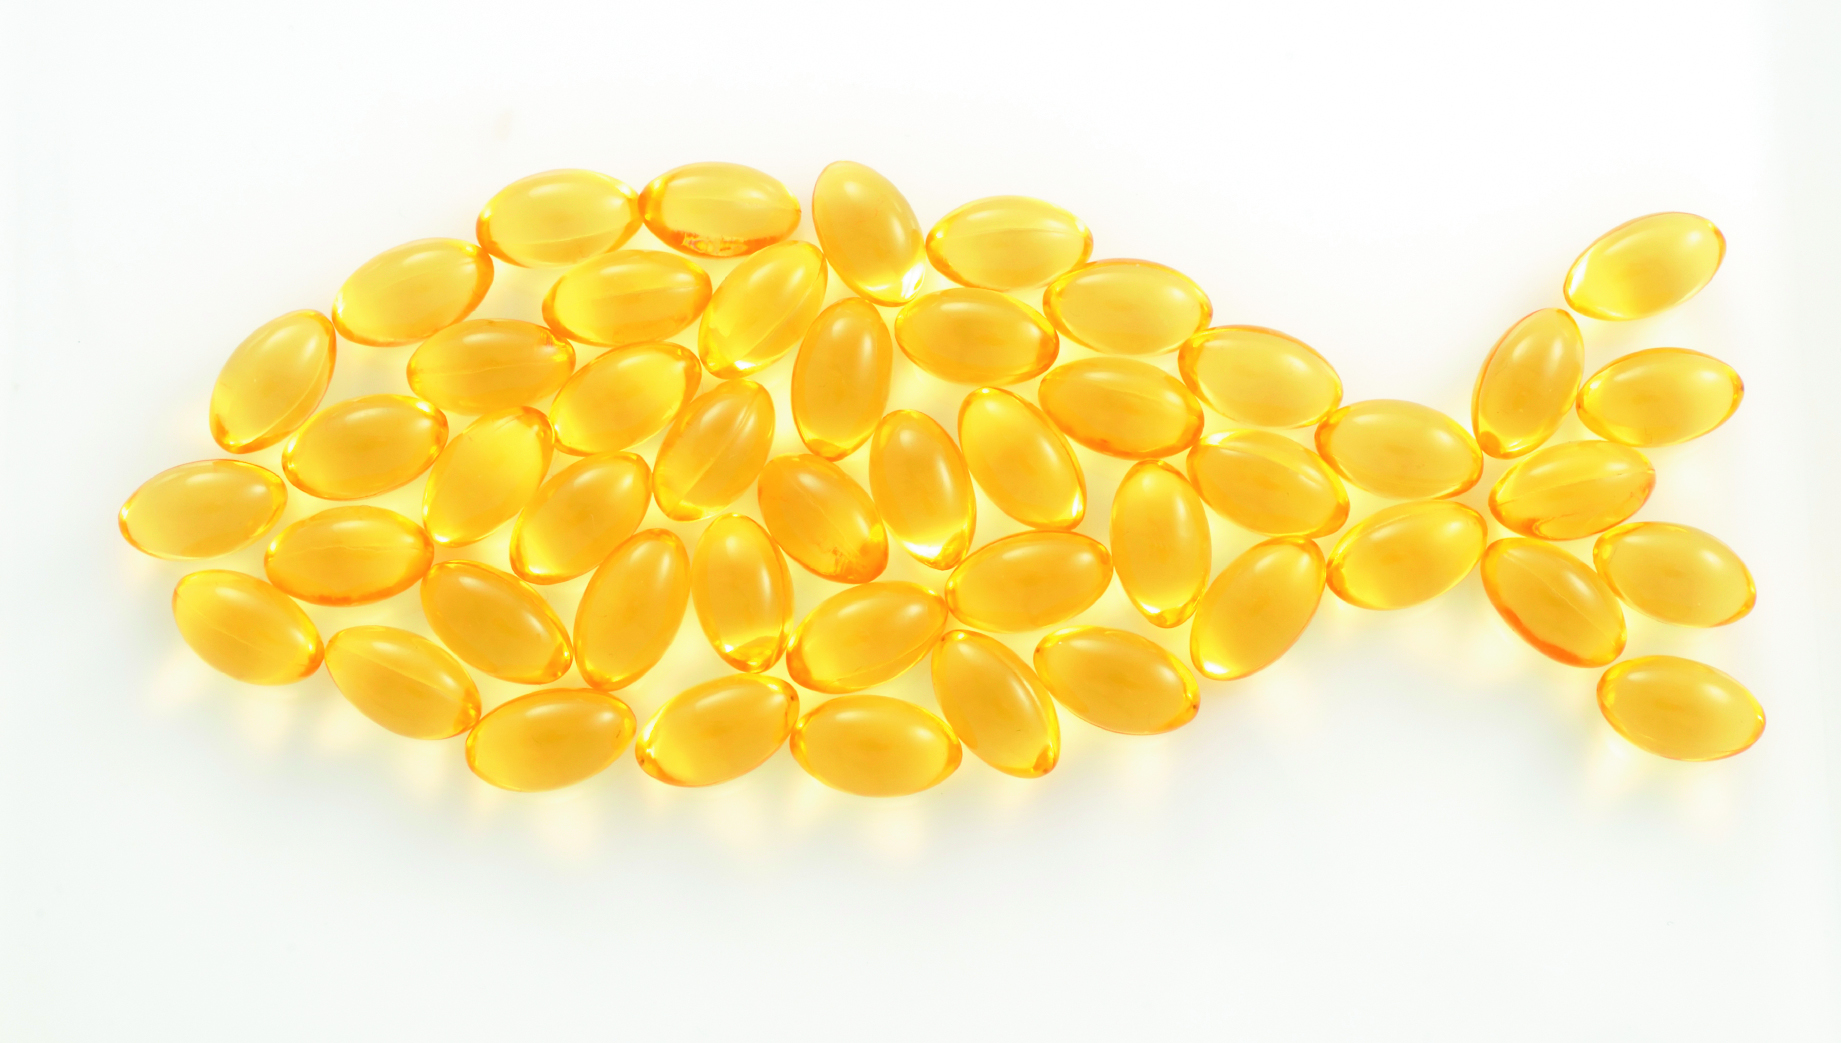 Fish oil study author considering industry criticism Pharmacy Today